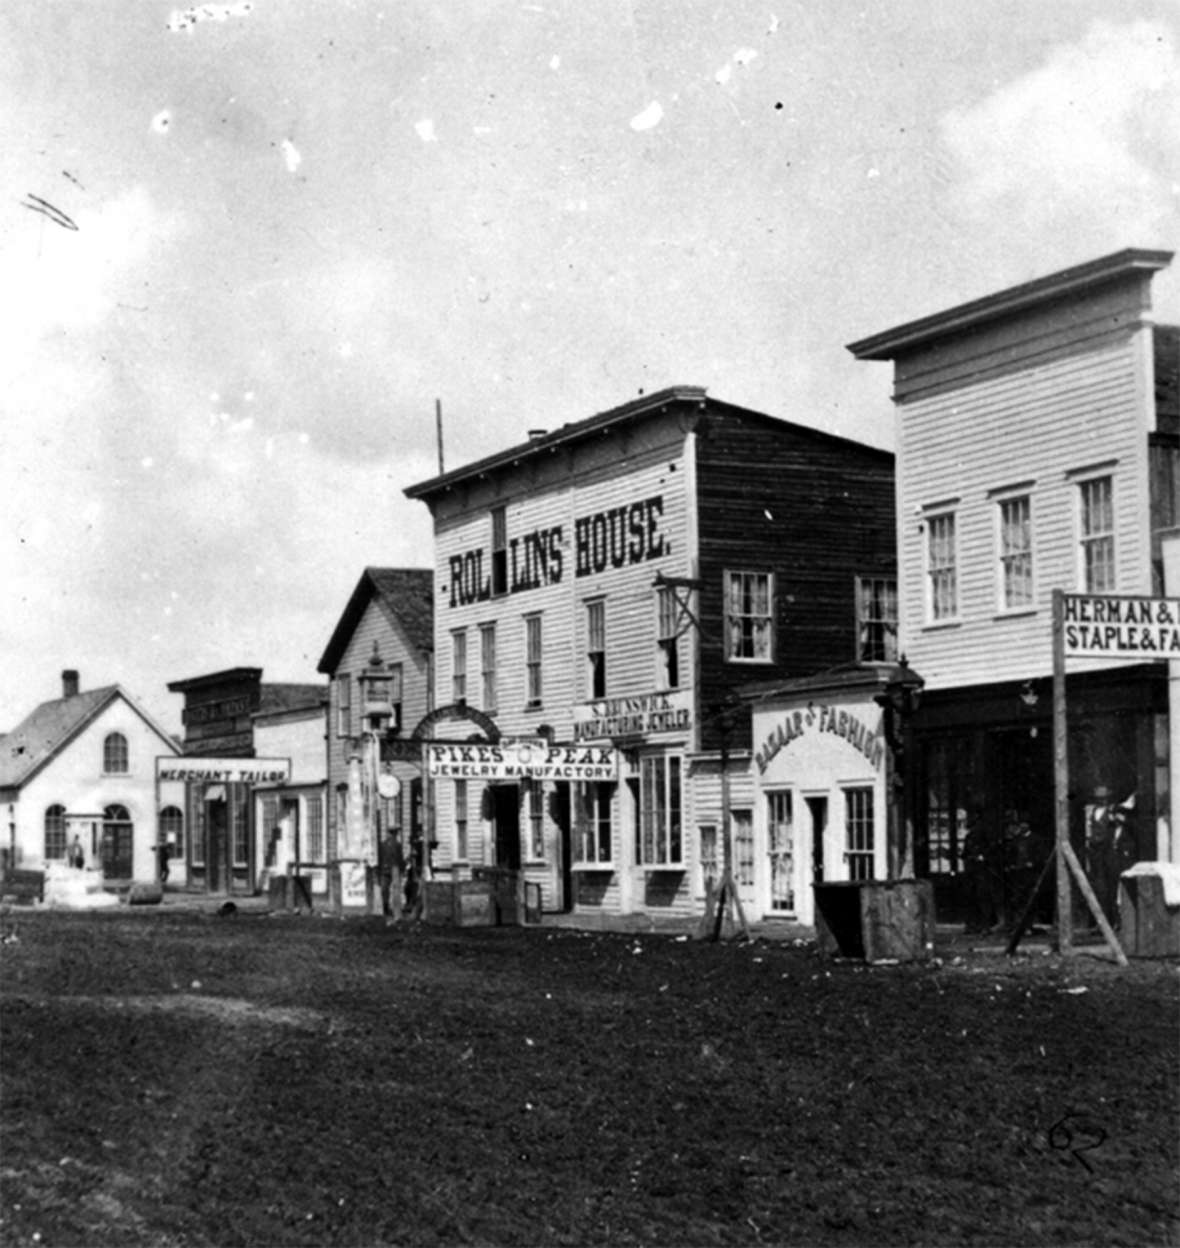 Dickinson lectured to a crowd of 250 the second time she visted Cheyenne, in September 1869. The event may have been at the Rollins House hotel, where the Territorial Legislature met the following month—and two months later voted for votes for women. W.H. Jackson photo.